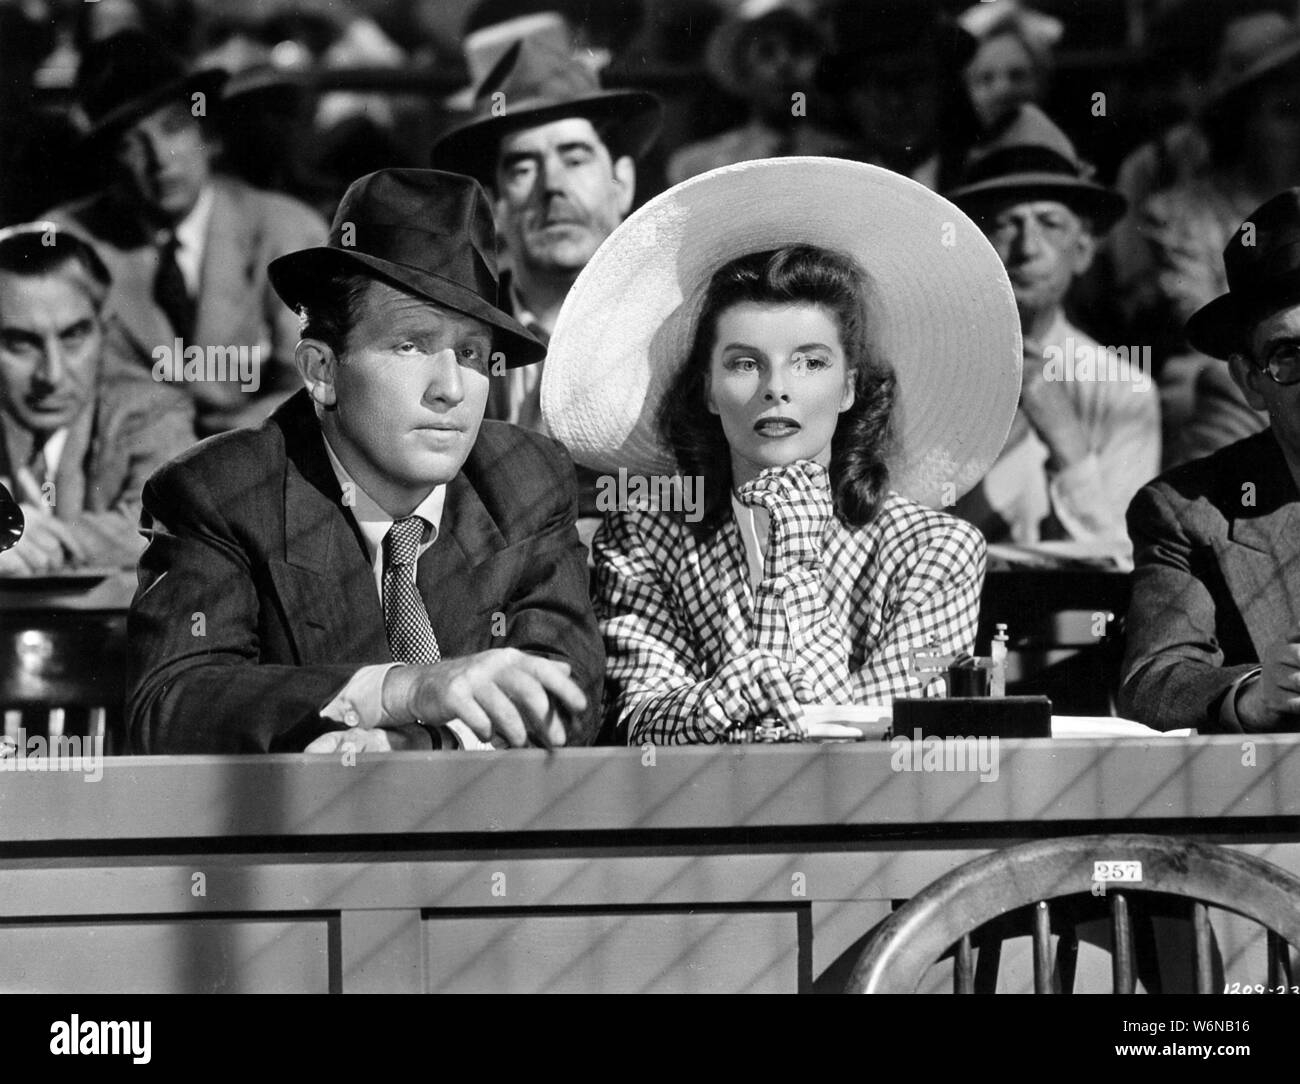 SPENCER TRACY and KATHARINE HEPBURN in WOMAN OF THE YEAR (1942), directed by GEORGE STEVENS. Credit: M.G.M / Album Stock Photo